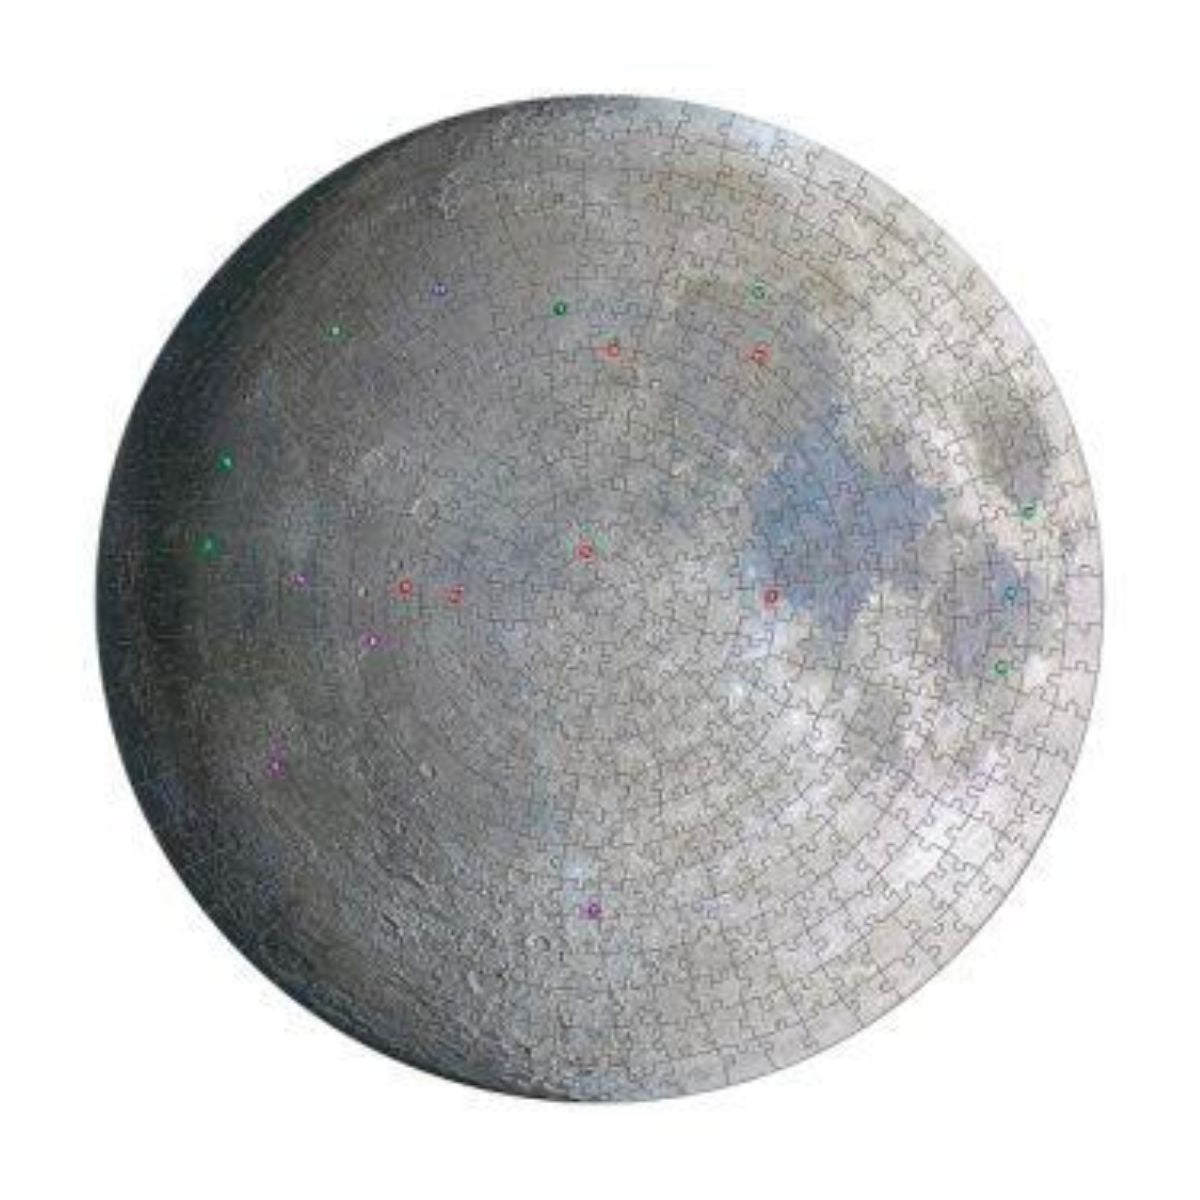 Puzzlebilities Shaped 500pc Jigsaw Puzzle - The Moon